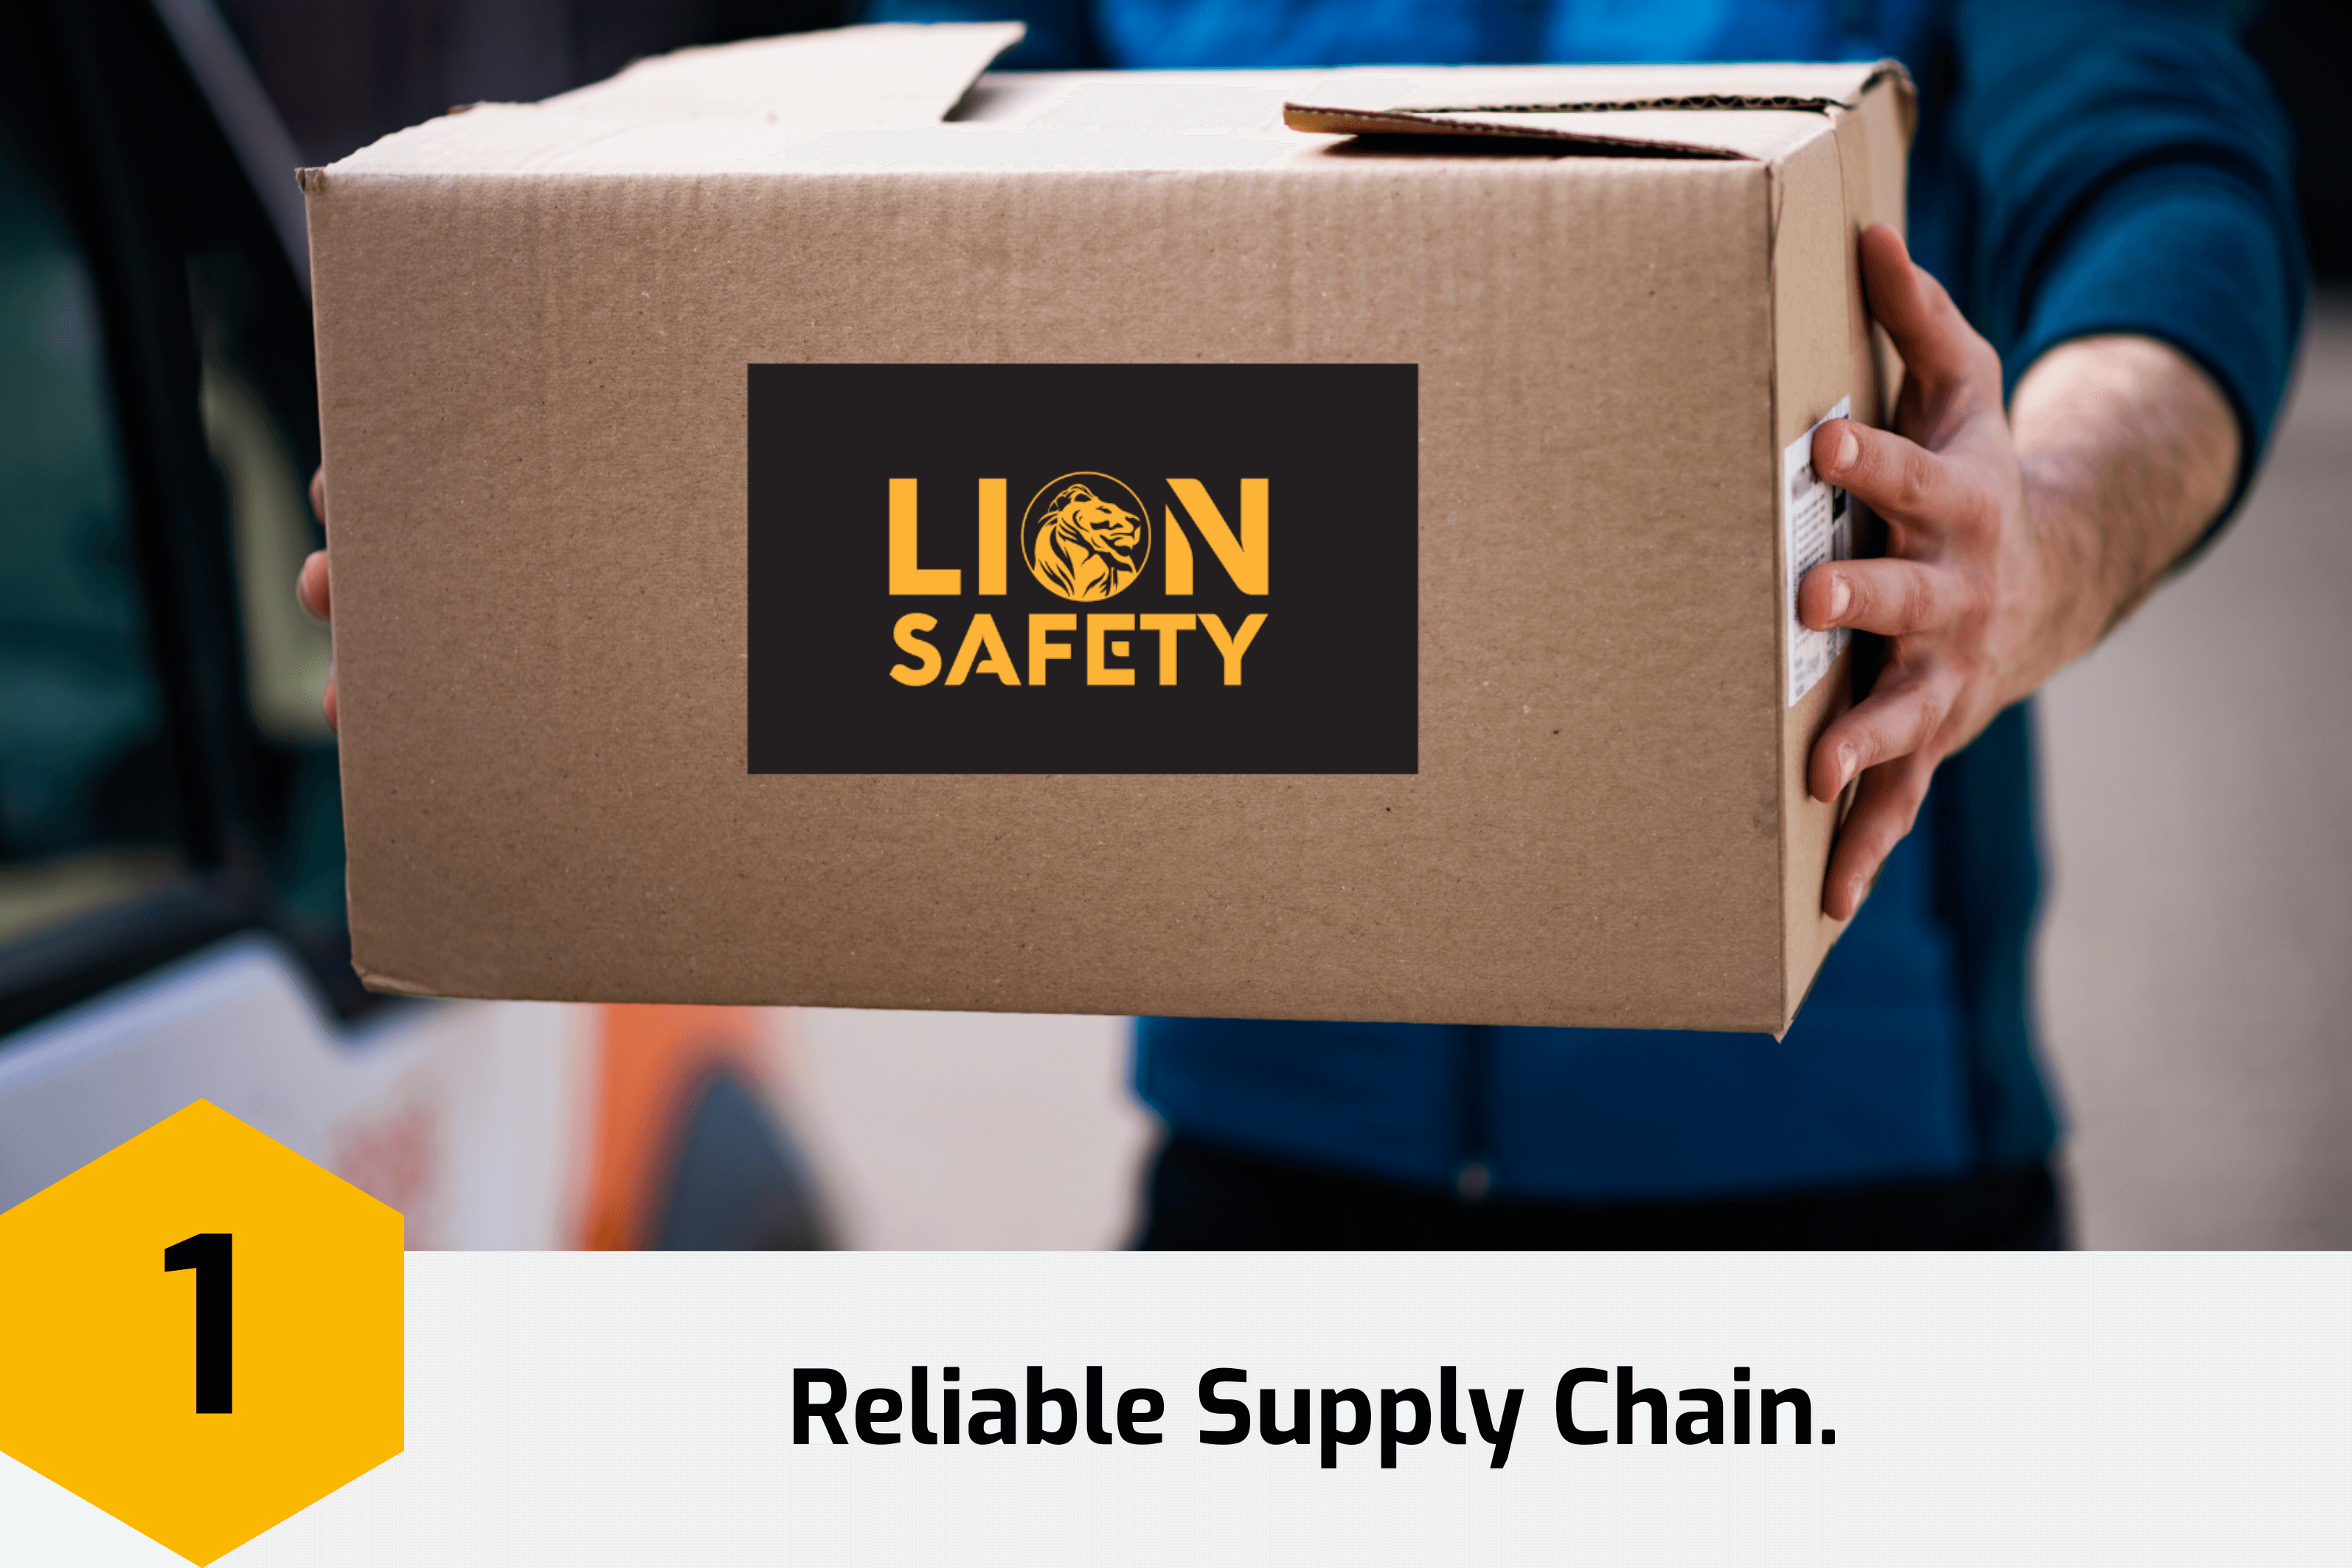 Lion Safety Reliable Supply Chain